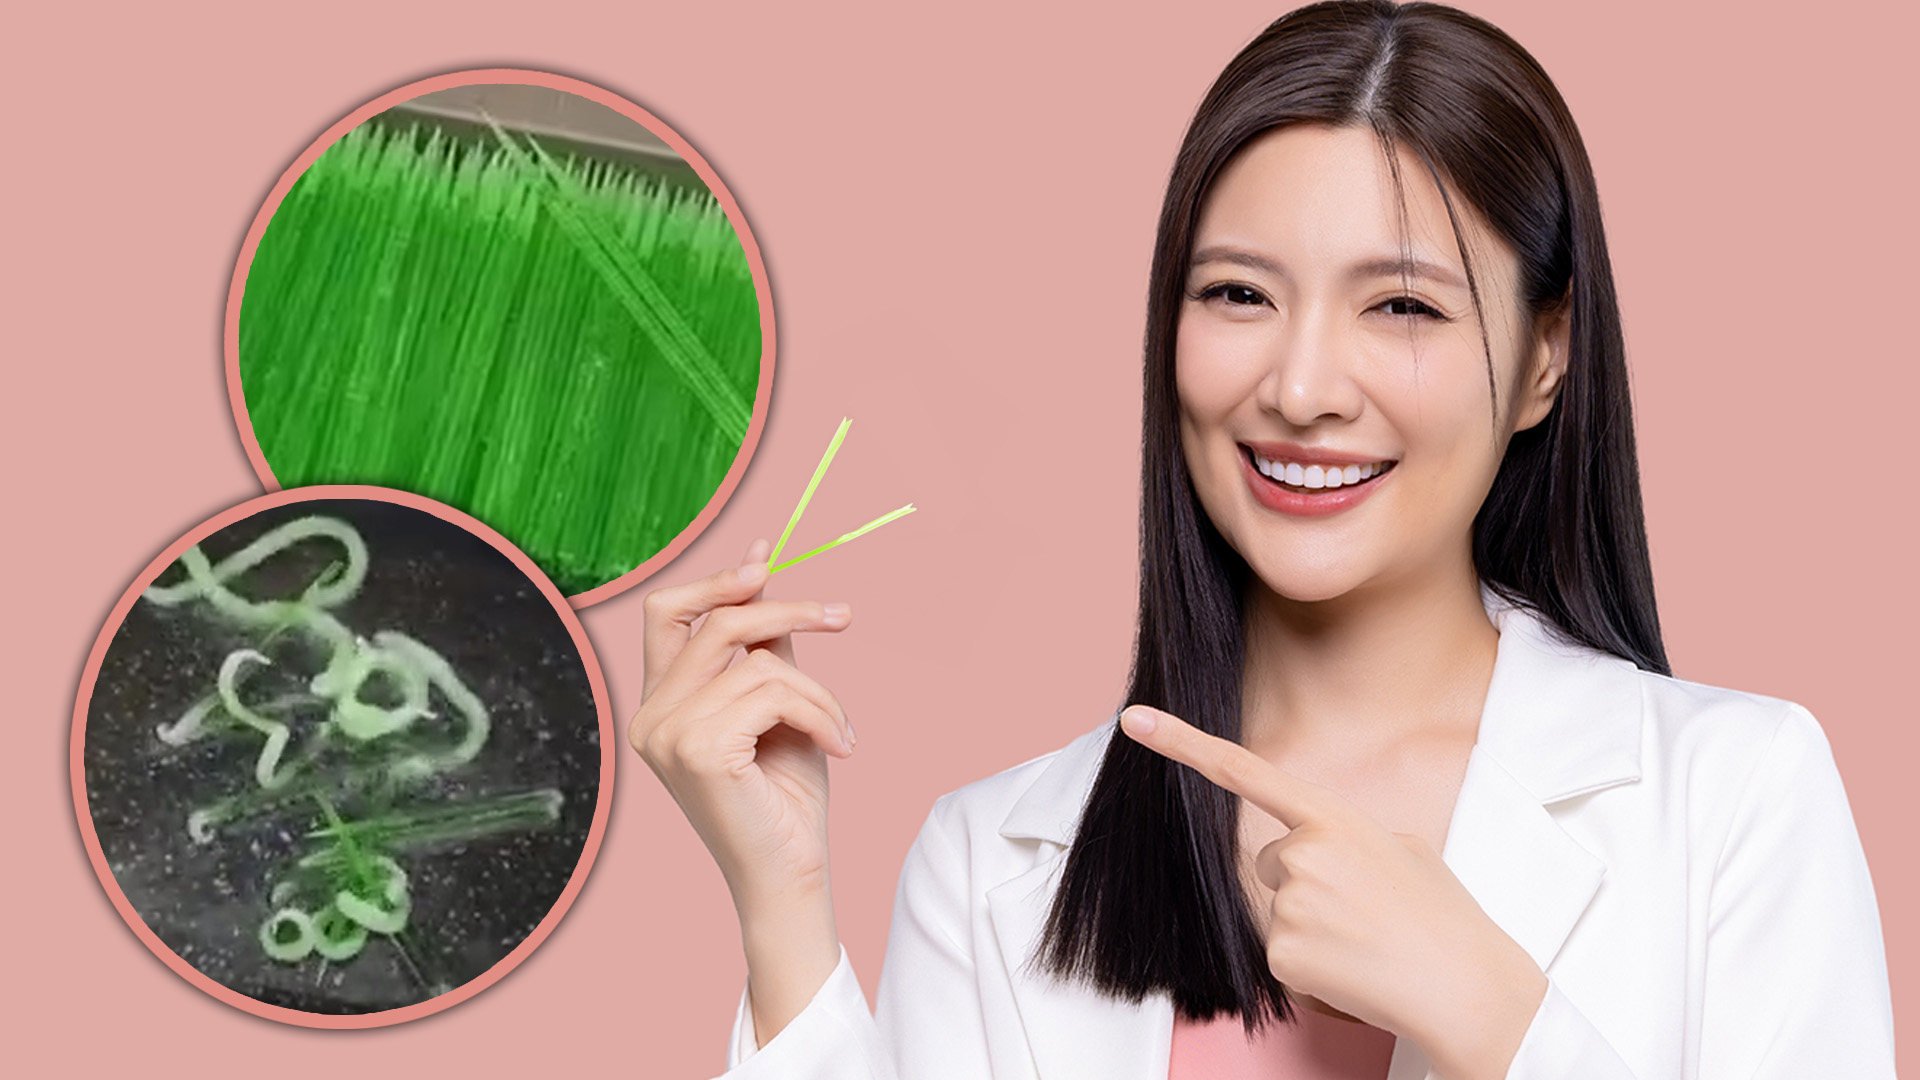 A trend of eating deep-fried, starchy toothpick, which began in South Korea, has spread to China, prompting the mainland authorities to issue a health warning. Photo: SCMP composite/Shutterstock/Weibo